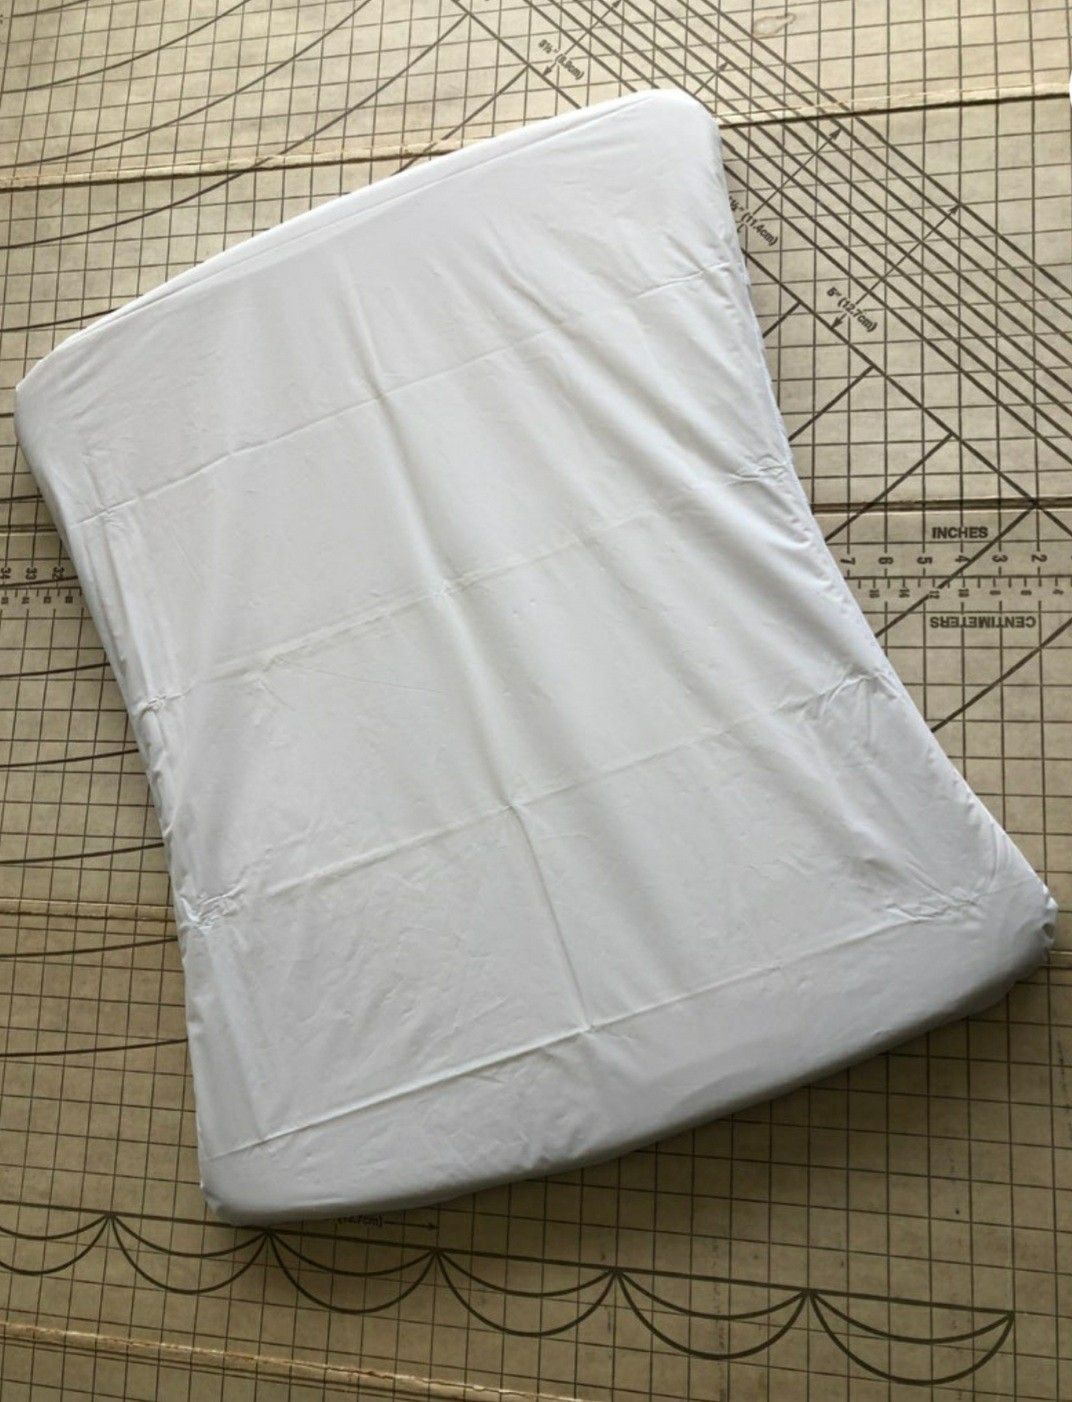 Stokke Changing Table Mattress Cover- $25